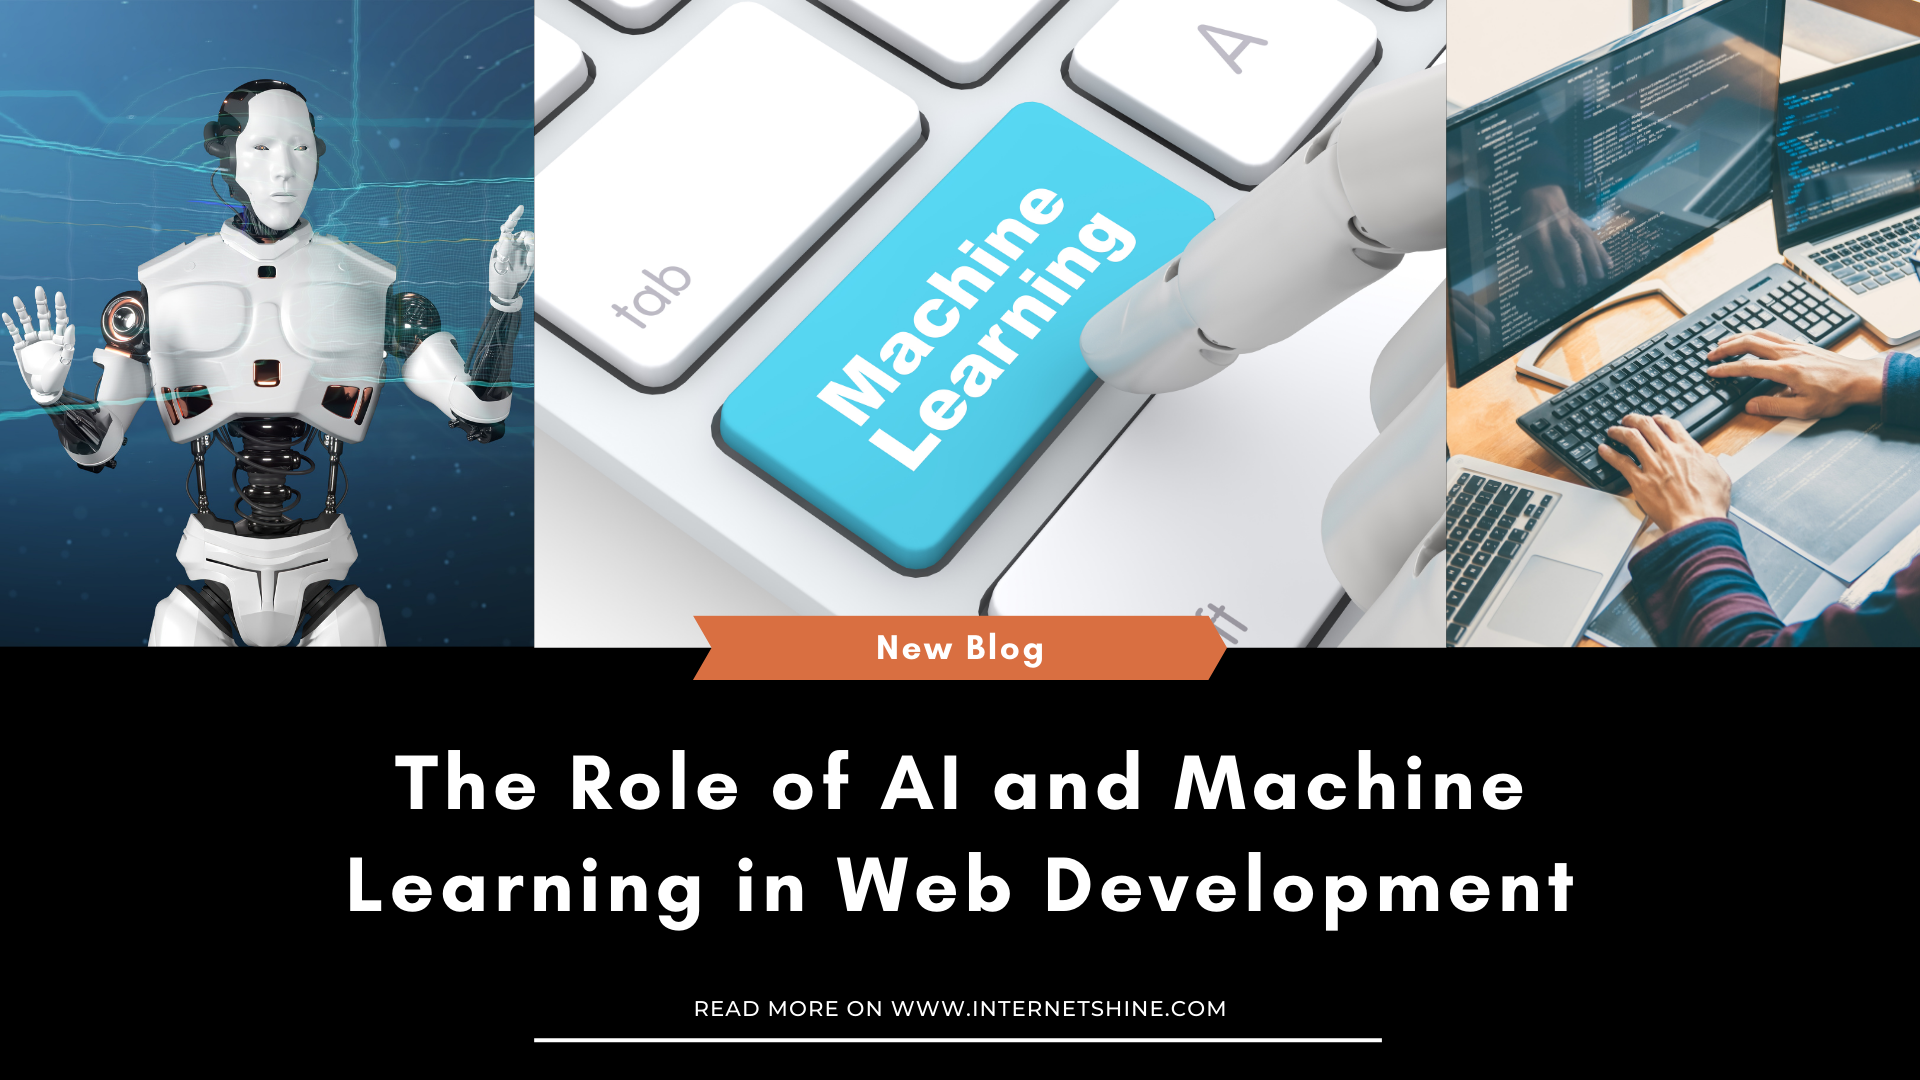 The Role of AI and Machine Learning in Web Development